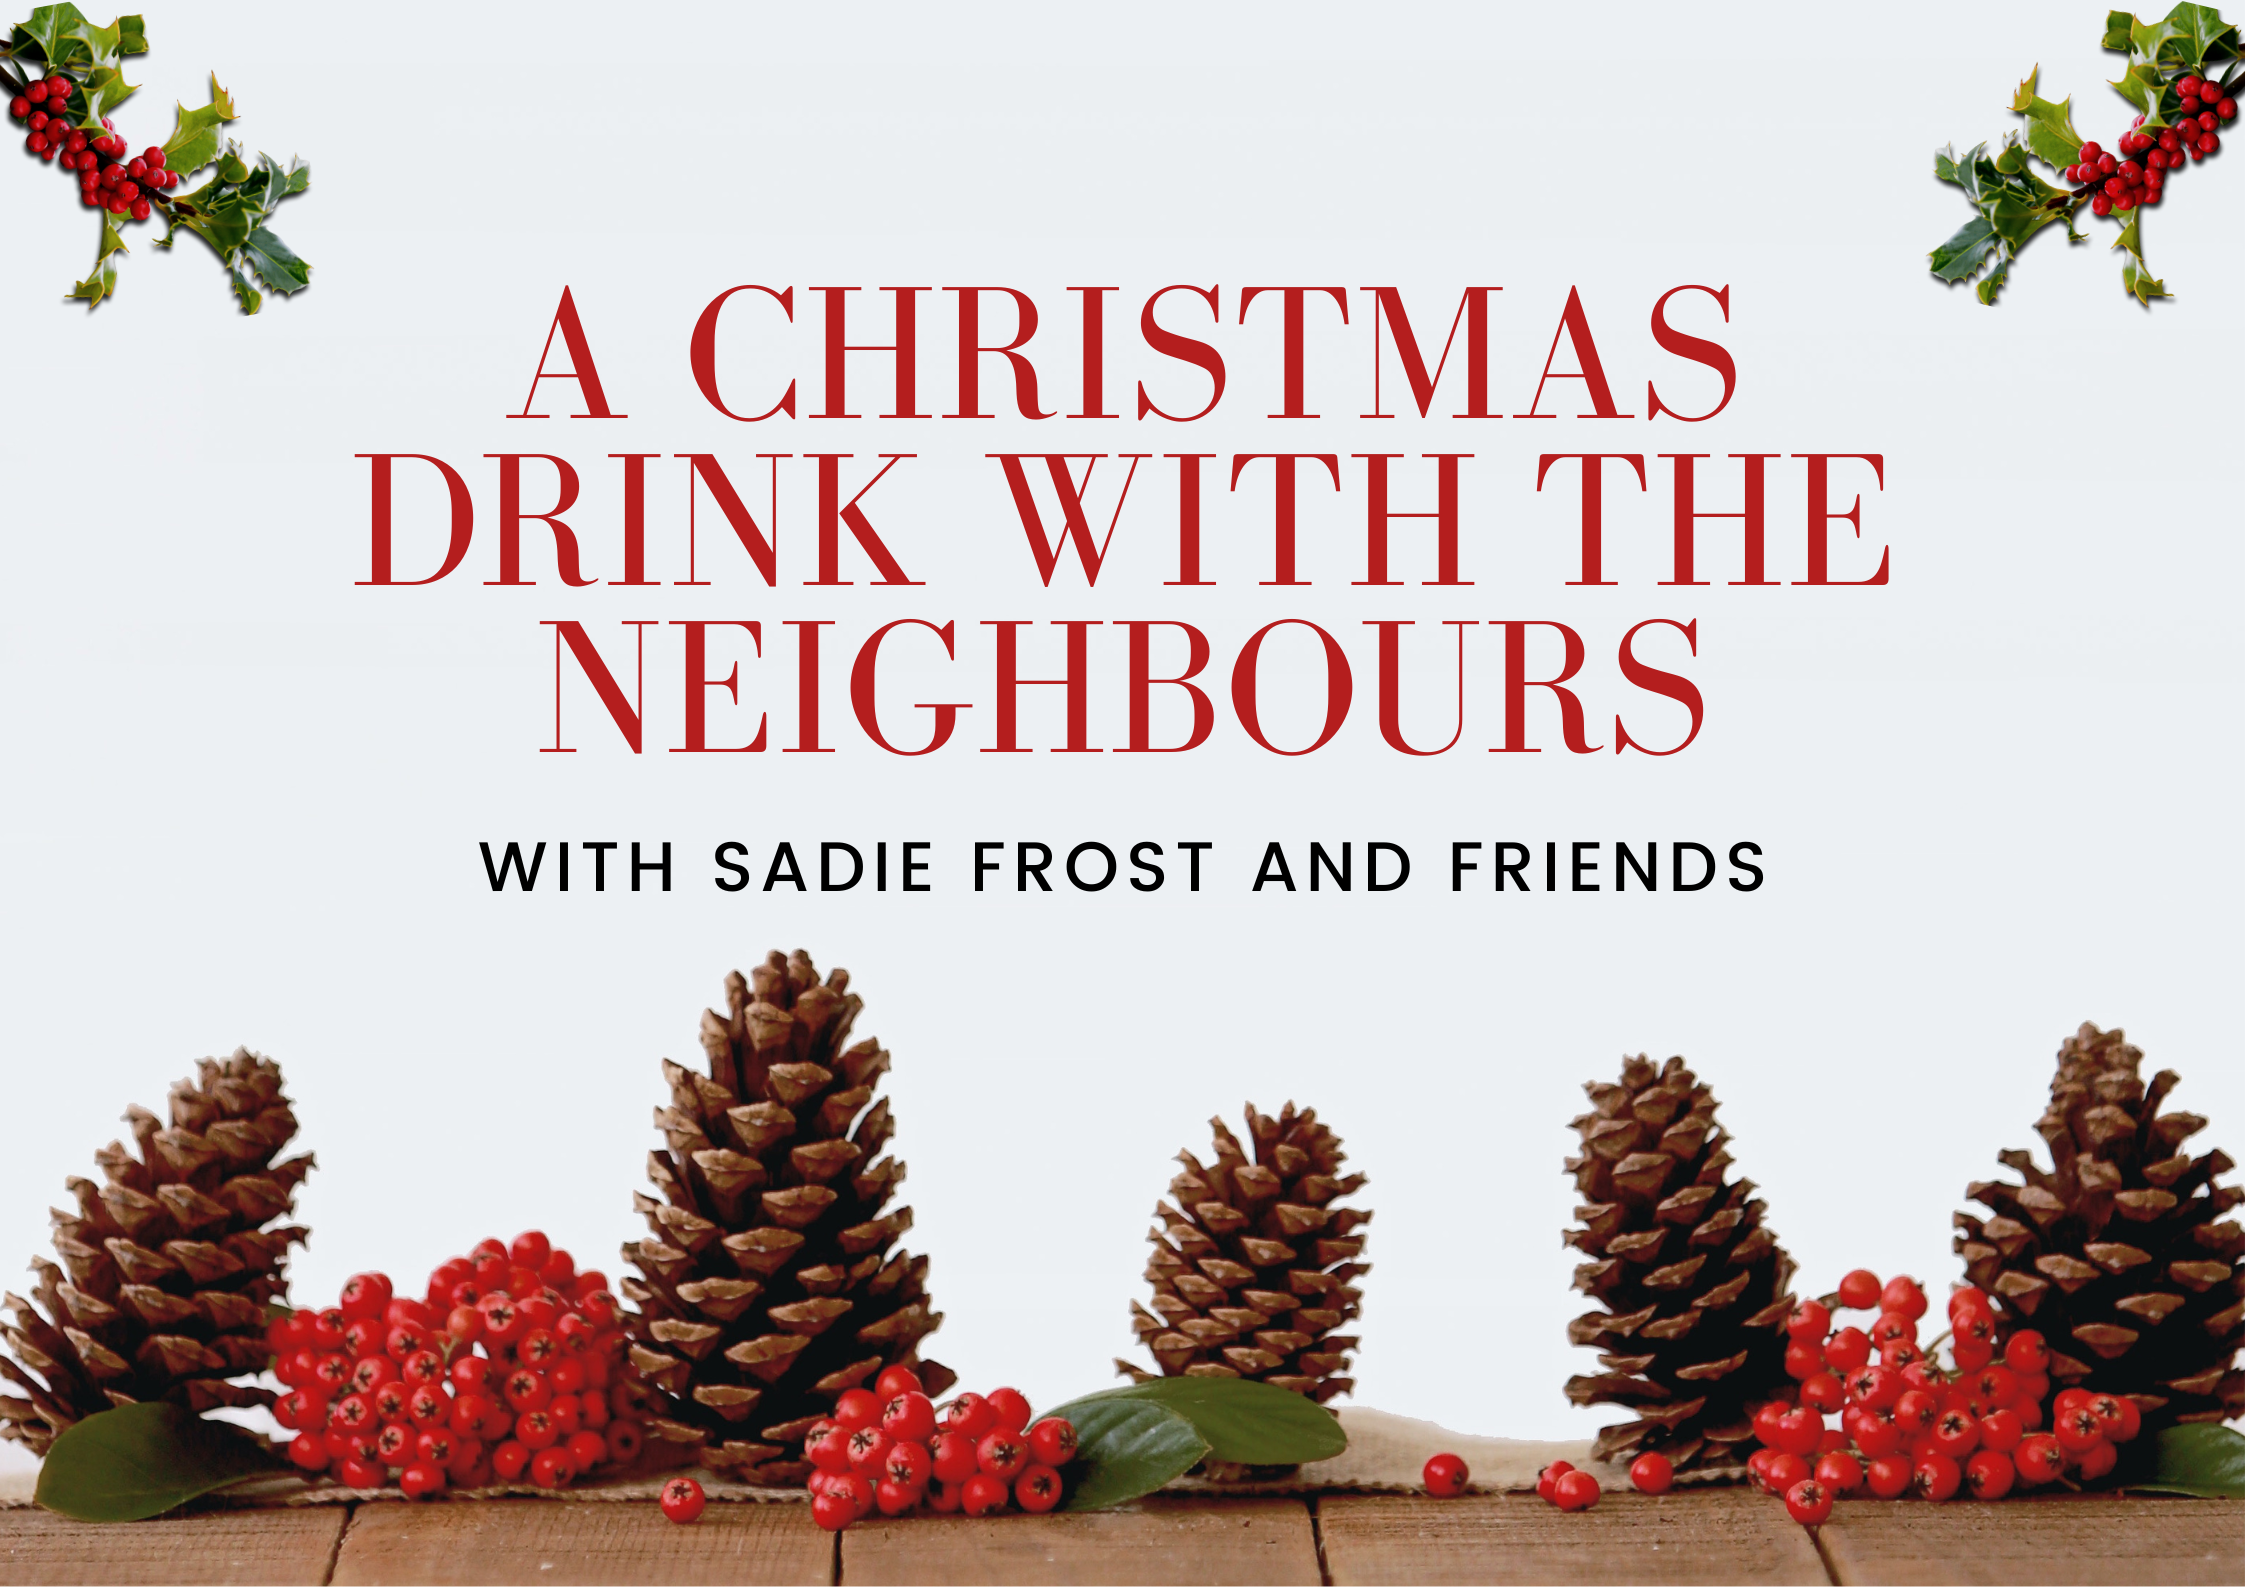 Cancelled: A Christmas drink with the neighbours co-hosted by Sadie Frost & Friends